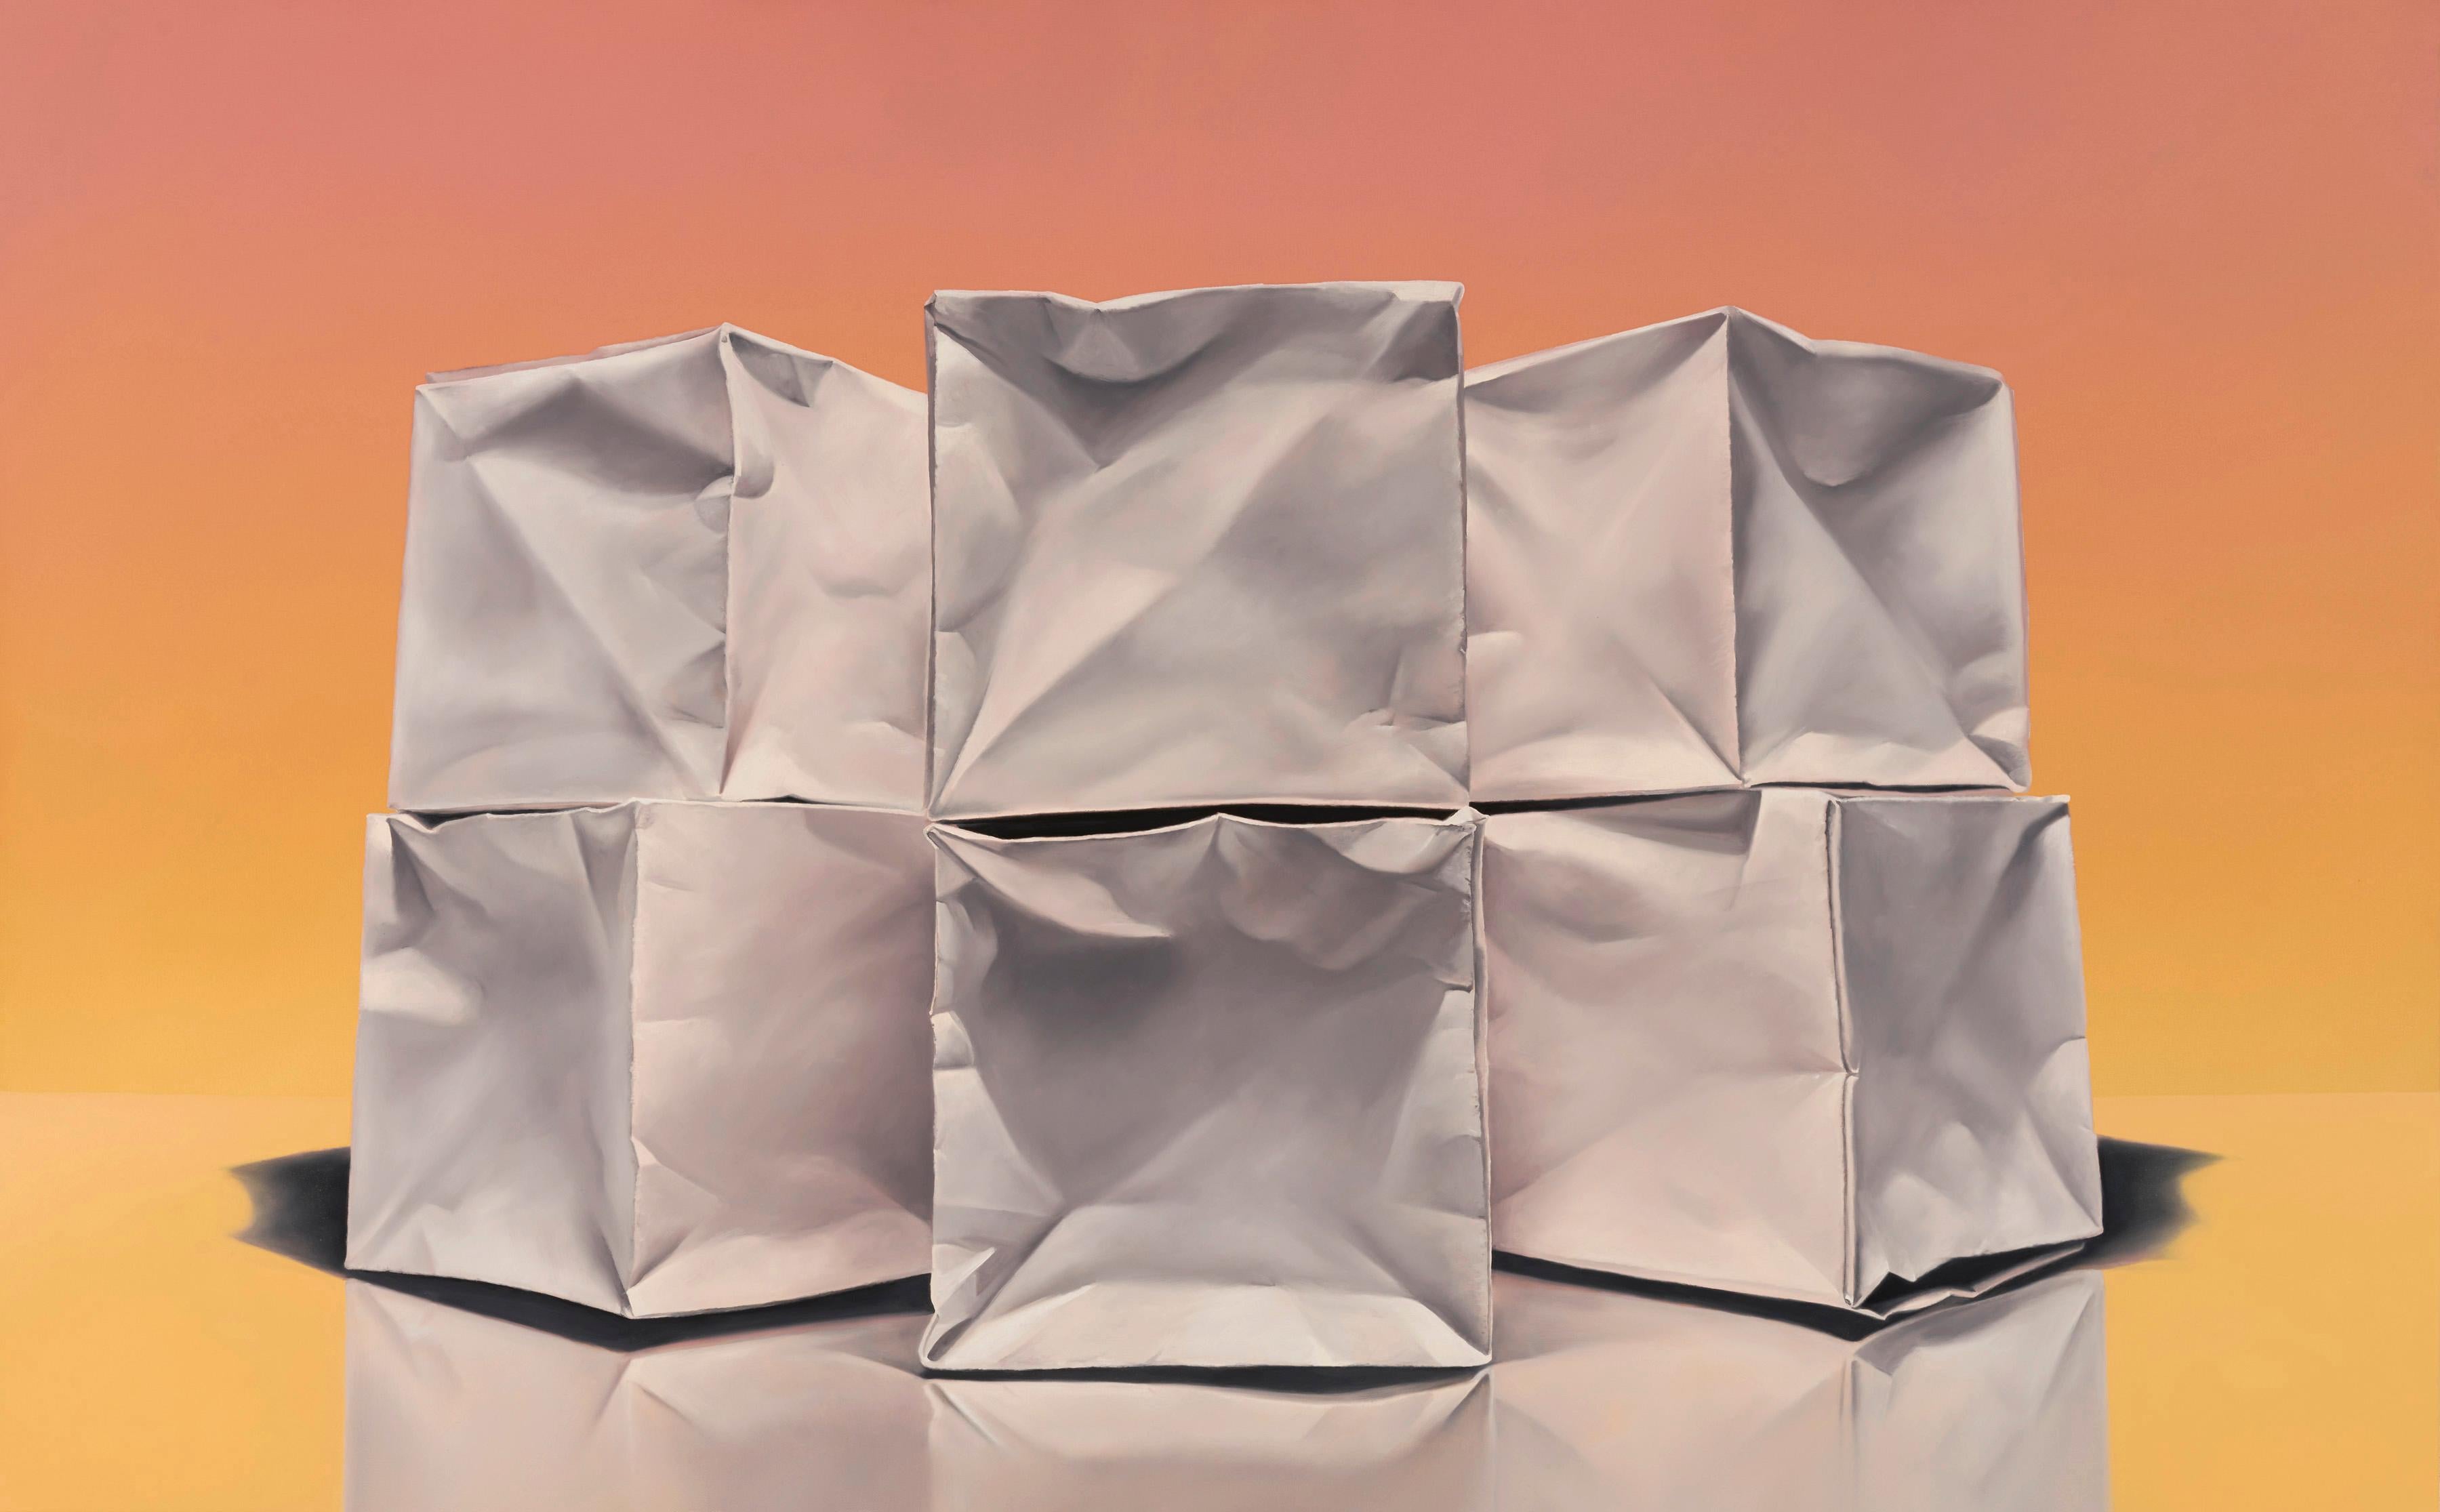 NIMBOSTRATUS - Photorealism / Still Life with Origami / High Color Sunset